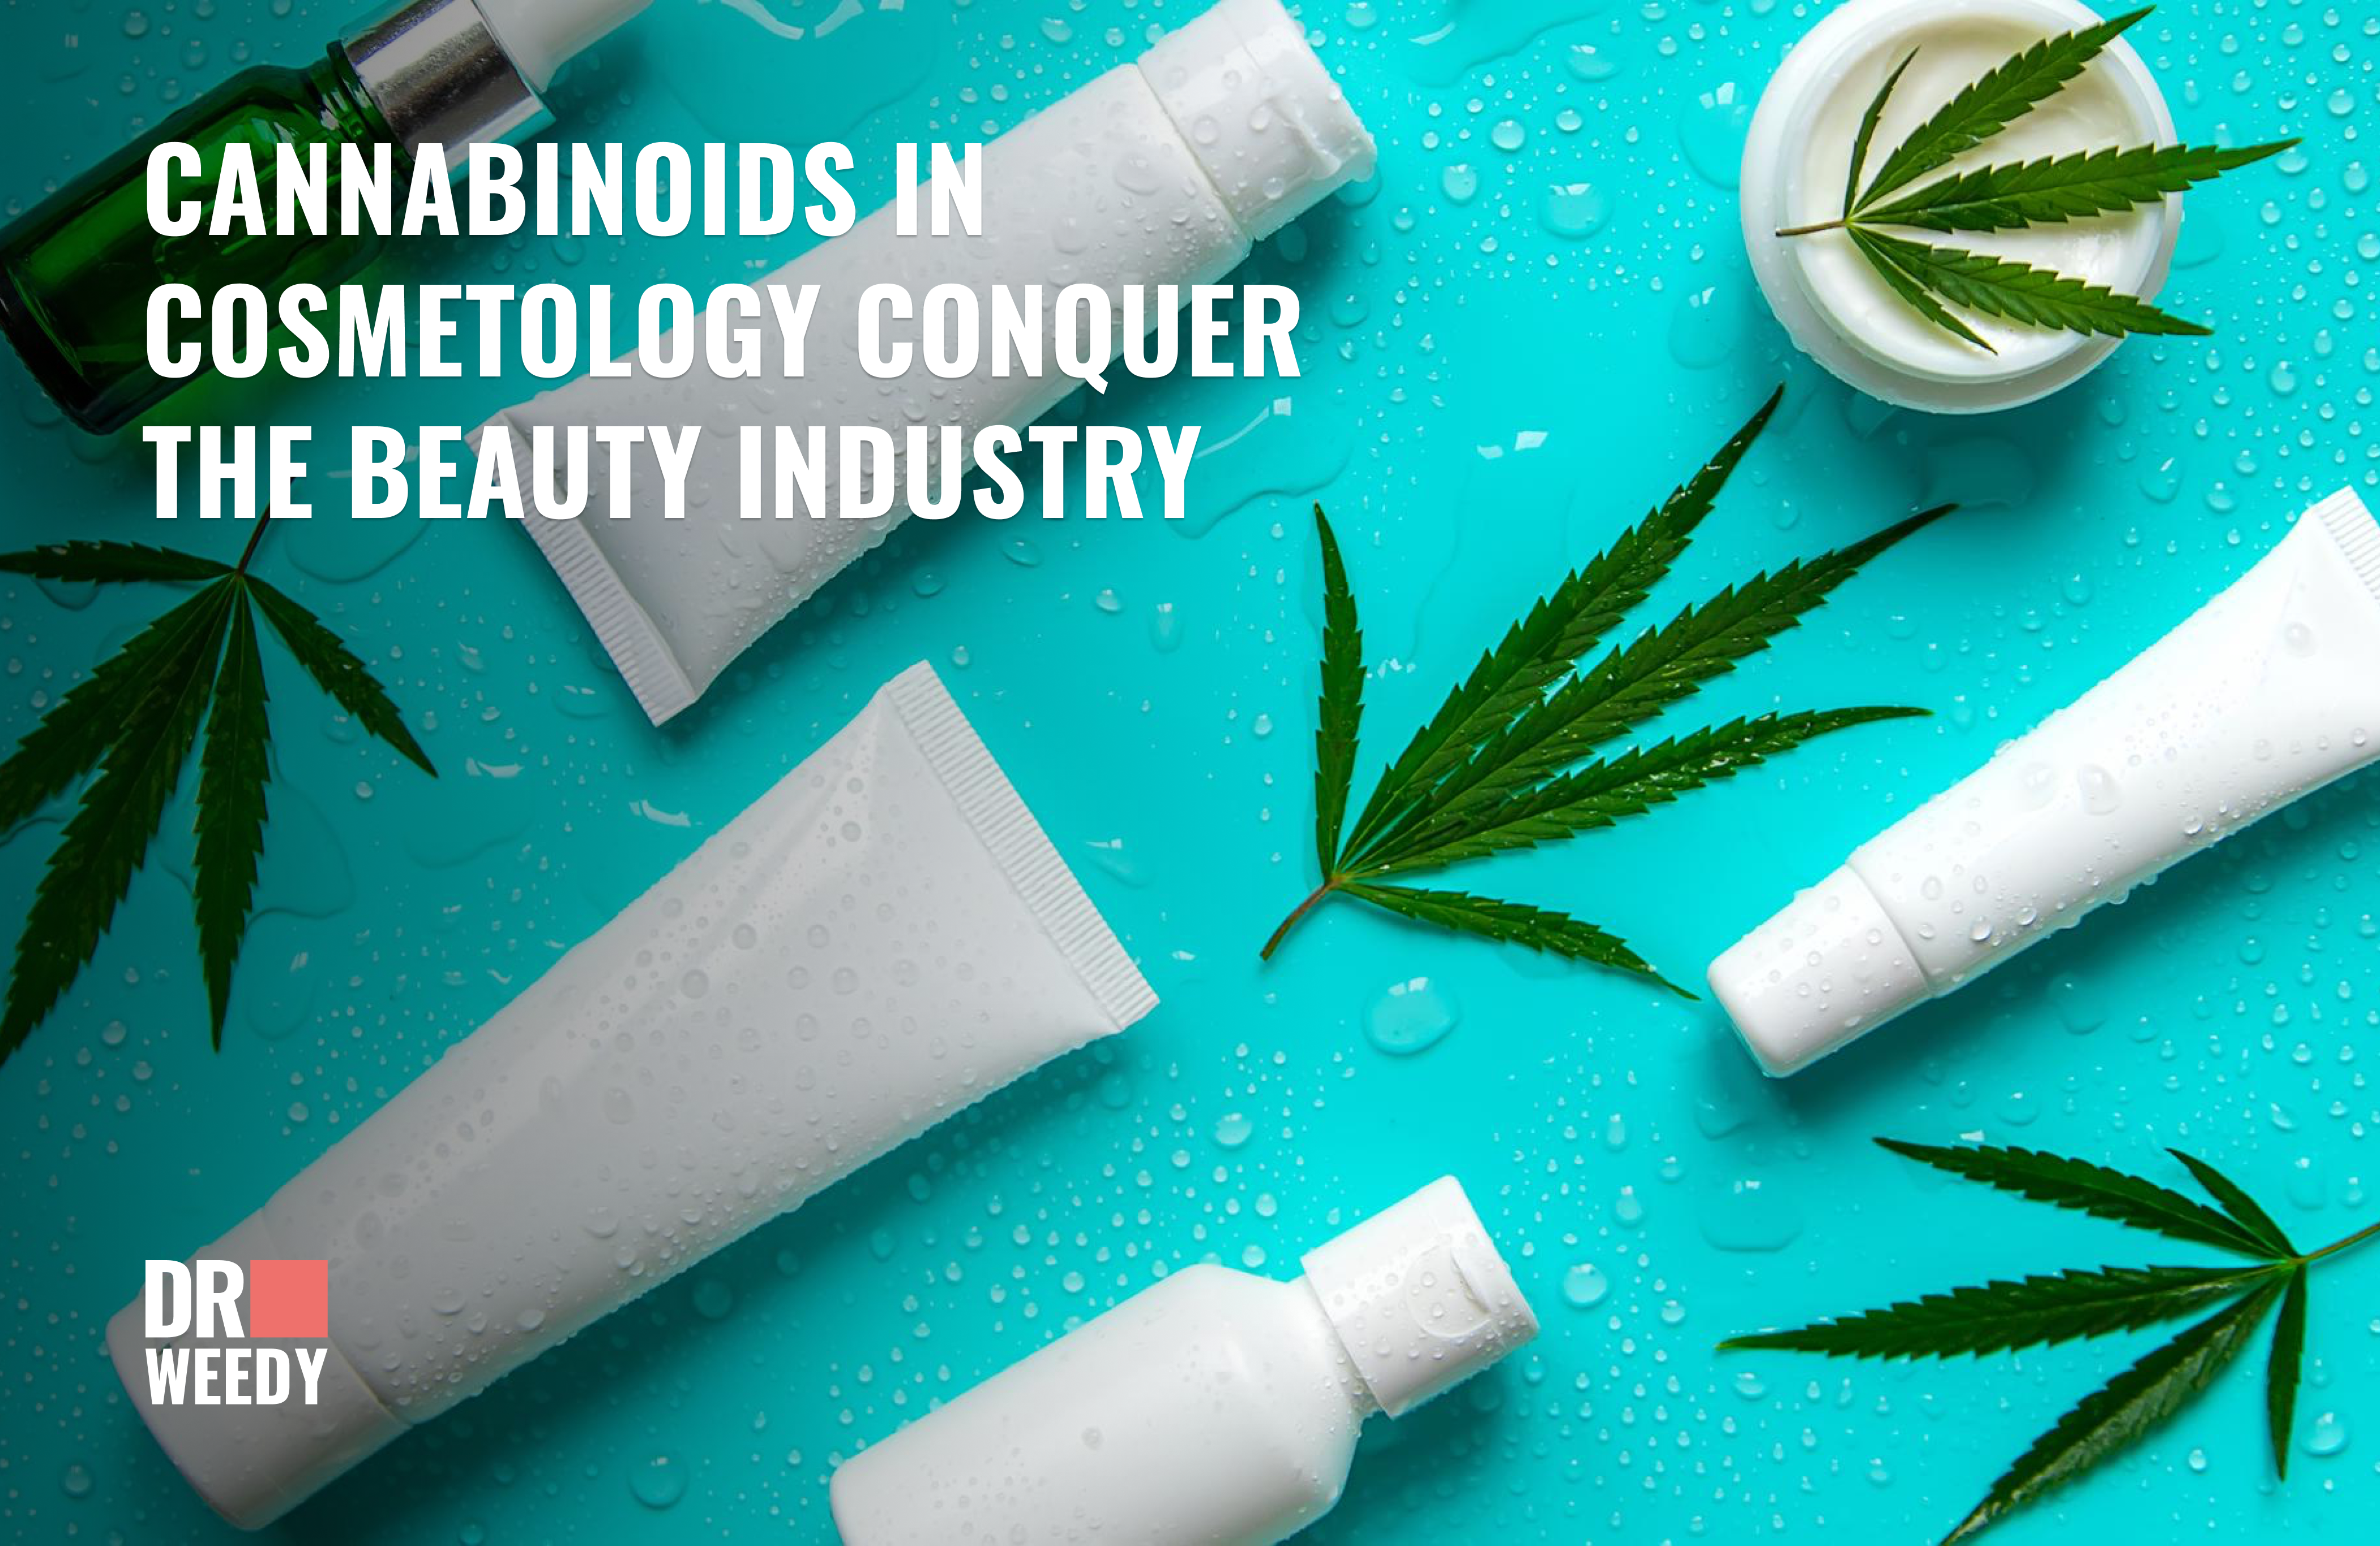 Cannabinoids in Cosmetology Conquer the Beauty Industry